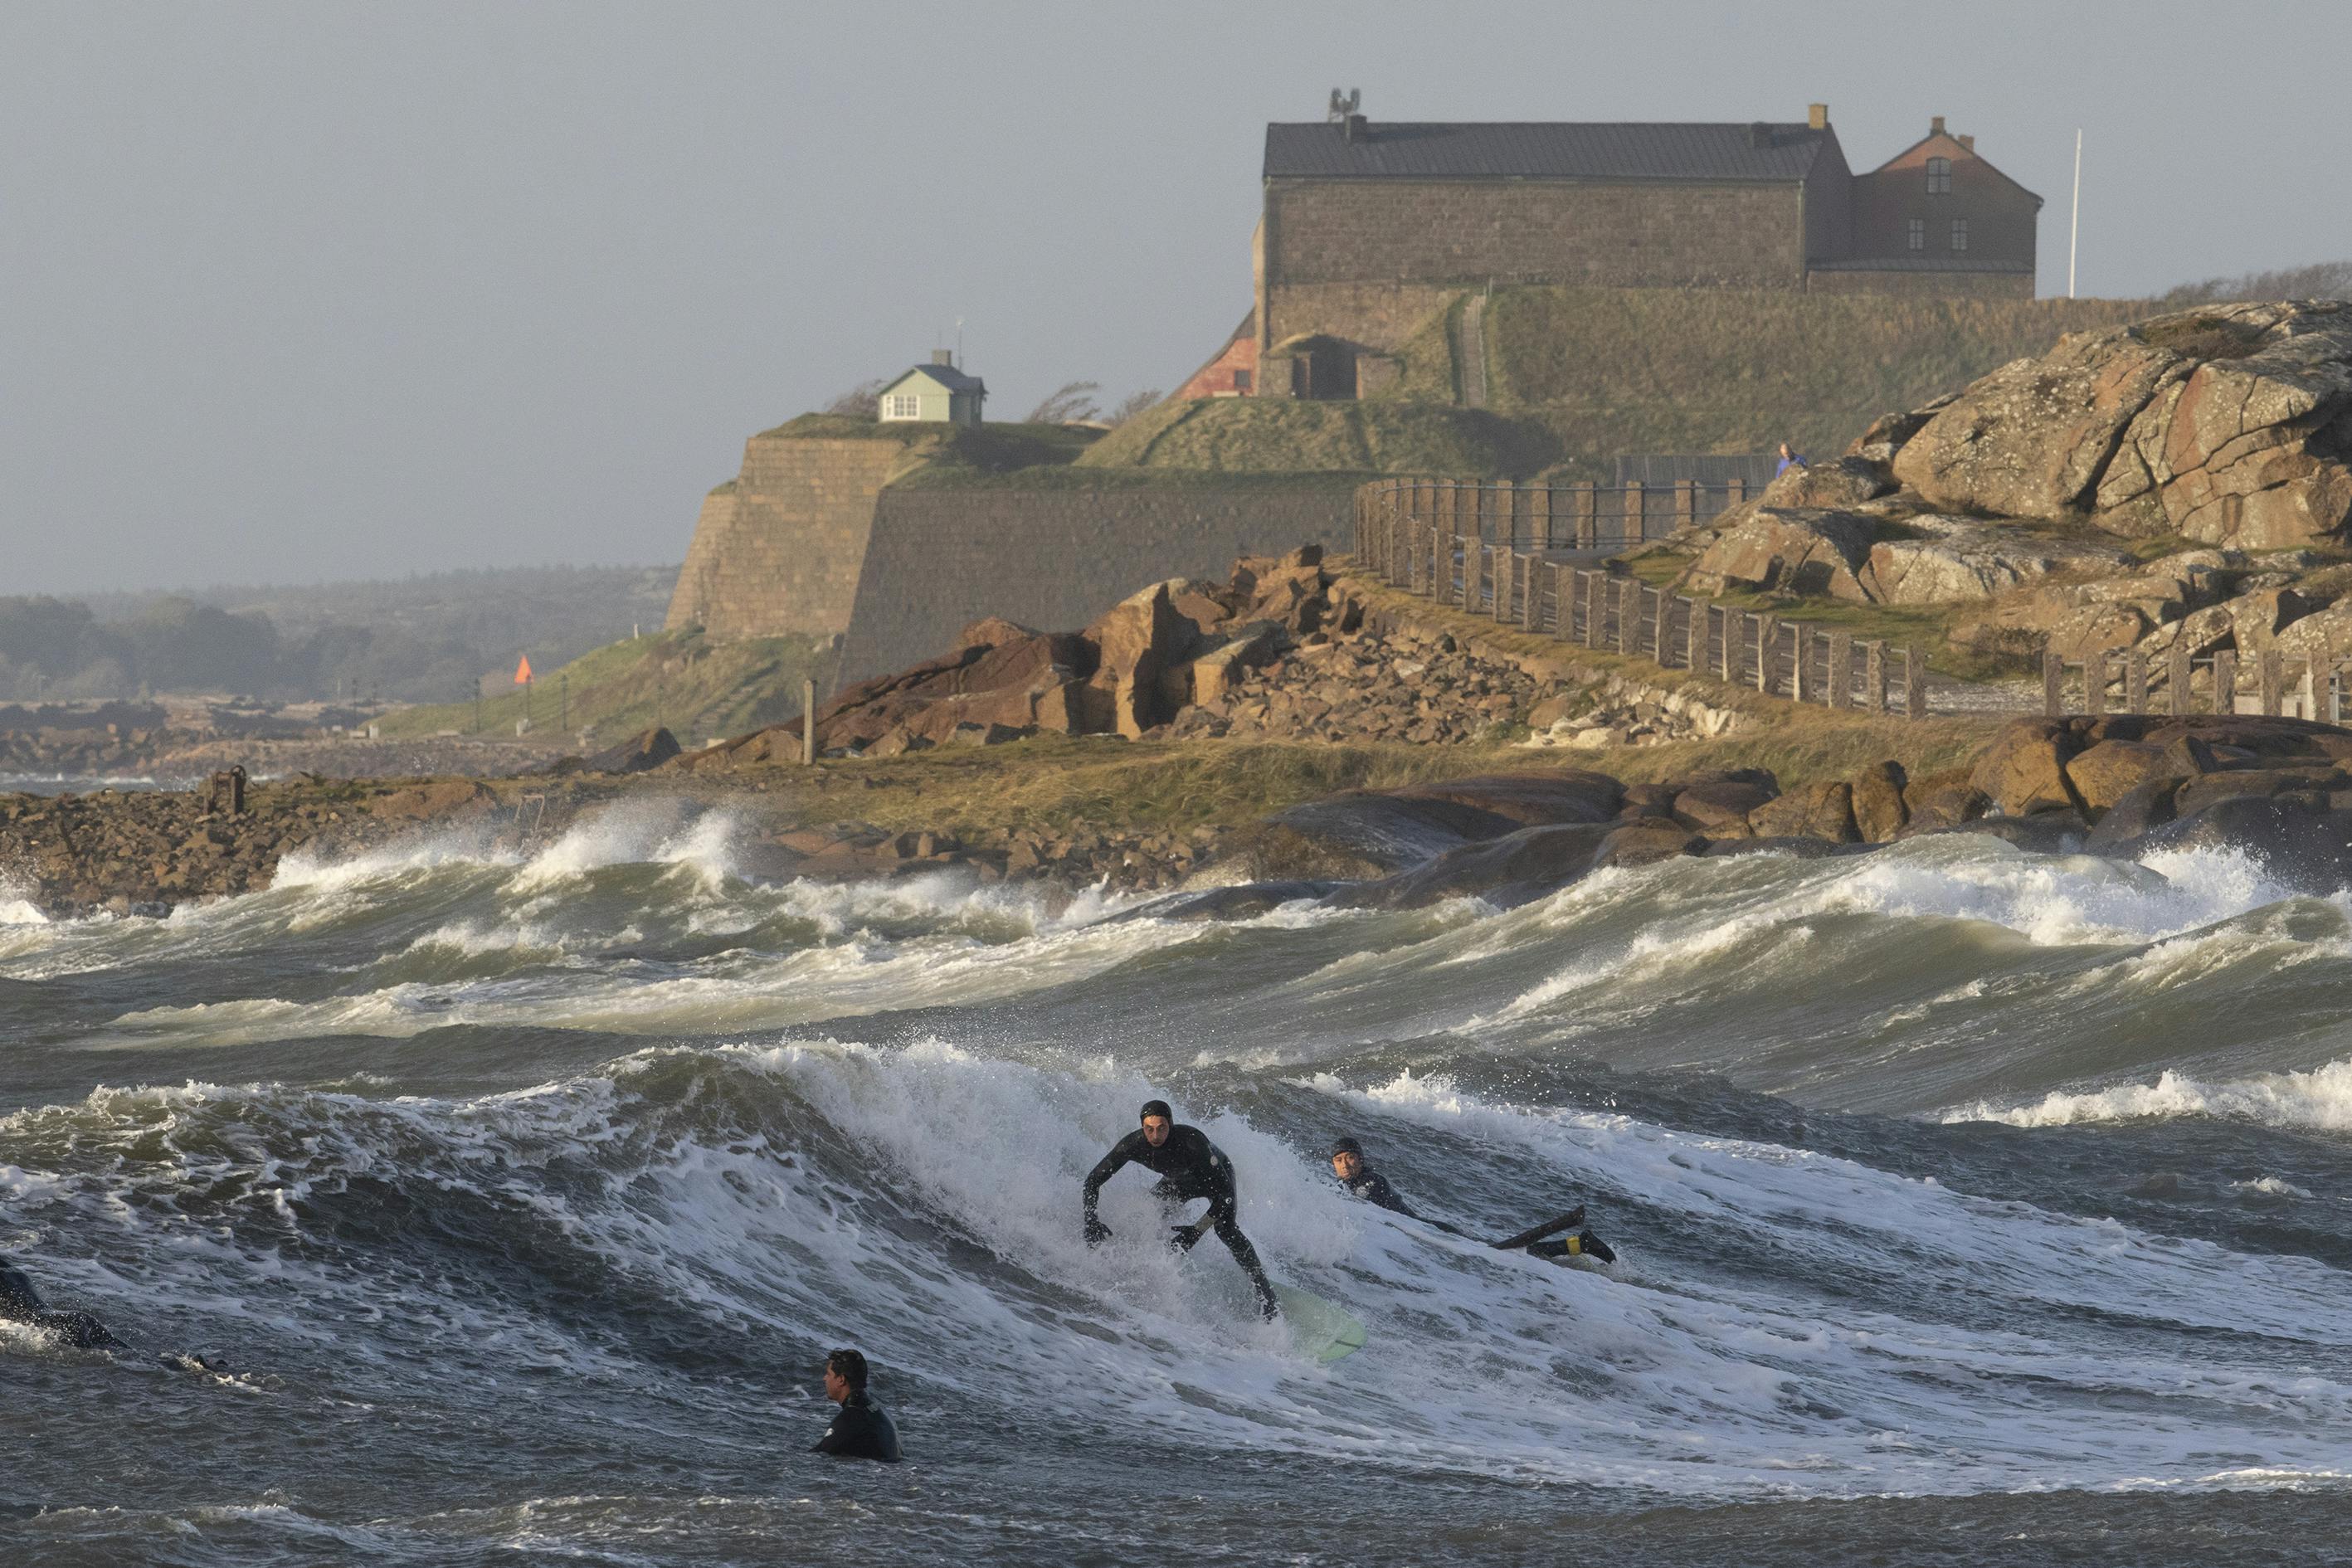 Surfing in Kåsa beach in Halland, next to the Varberg Fortress, is a magnificent experience.